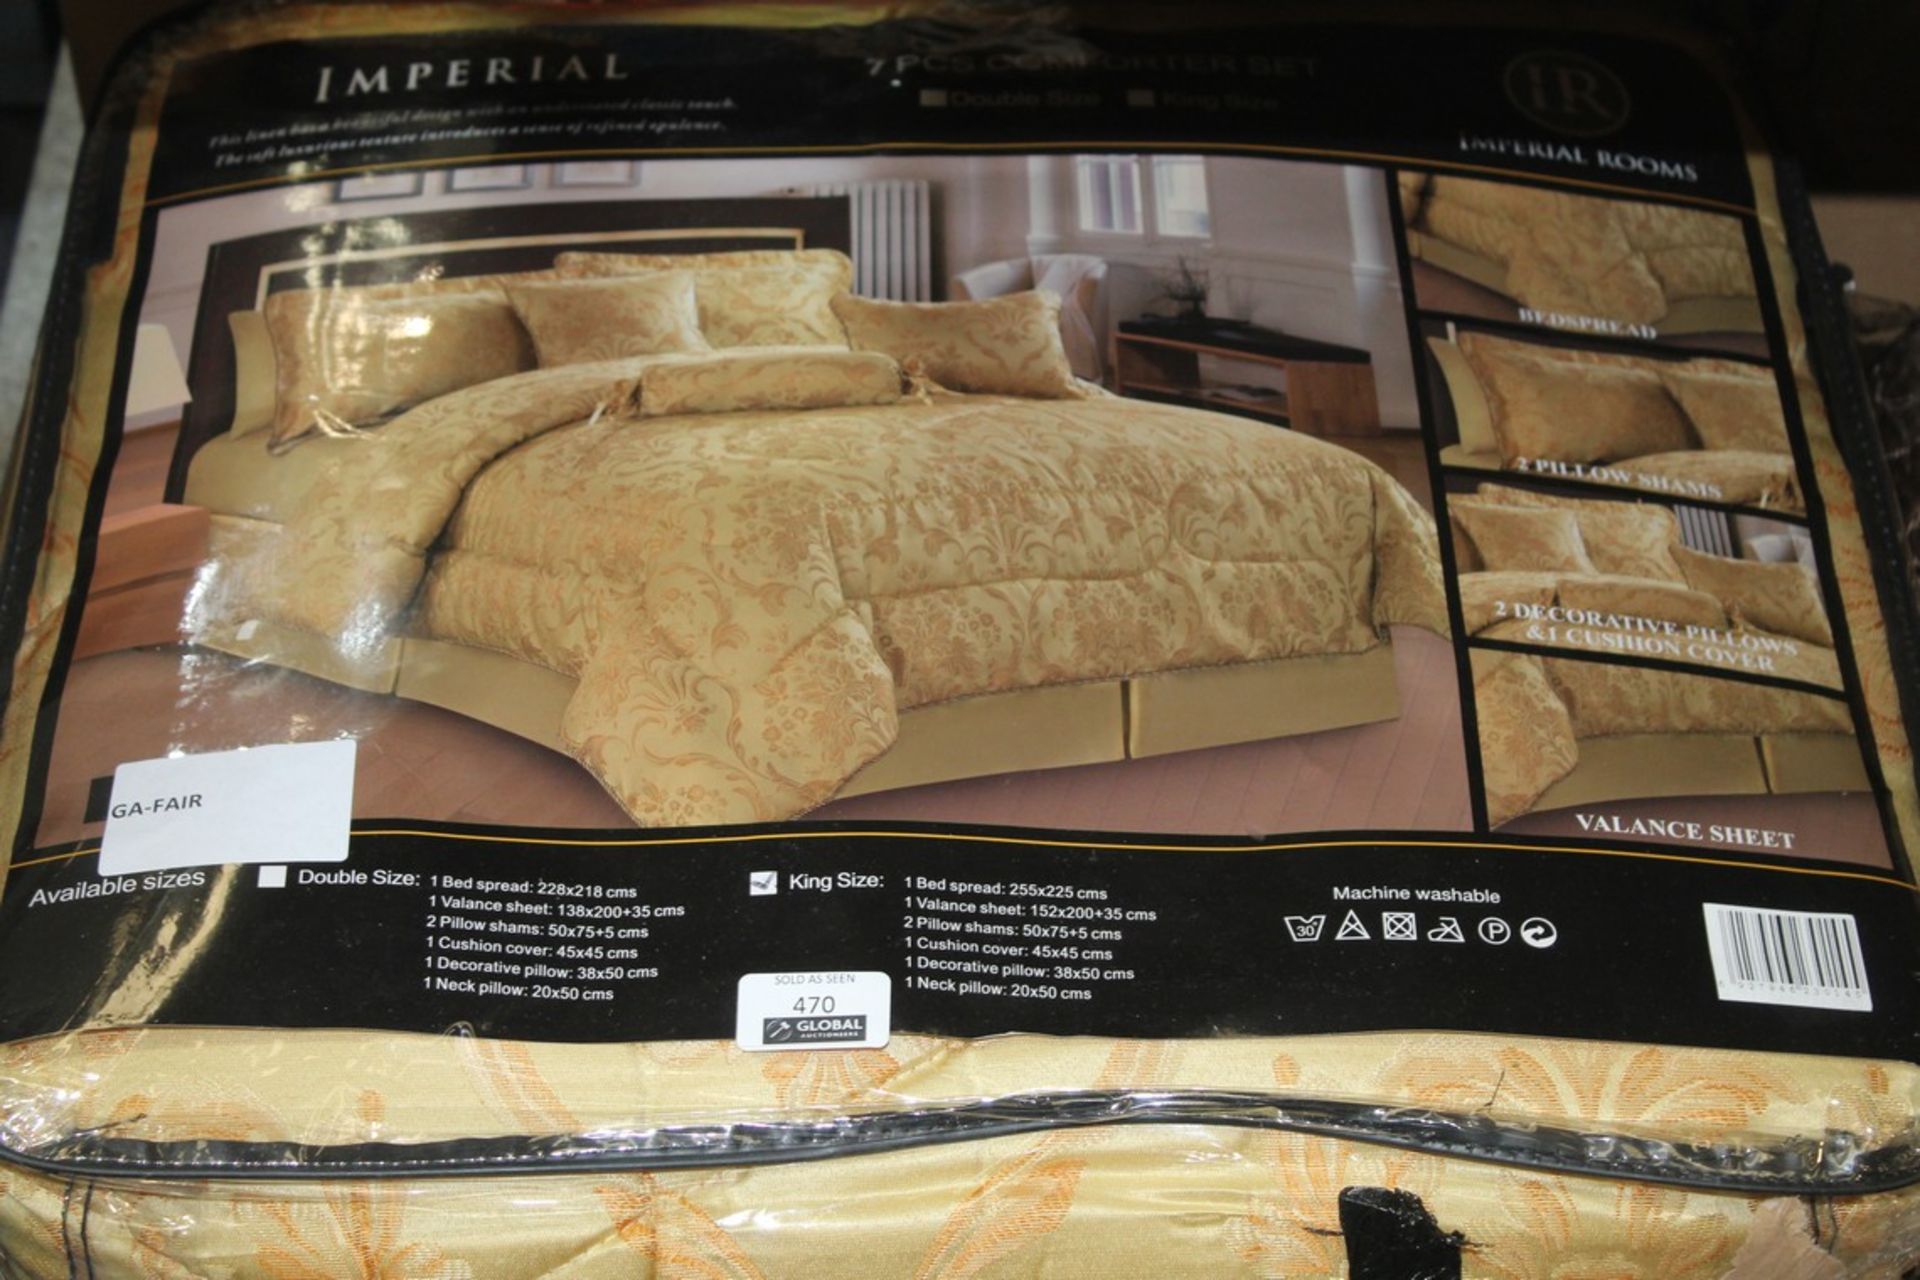 Bagged Imperial Rooms 7 Piece King-size Comforter Set In Gold RRP £80 (Pictures Are For Illustration